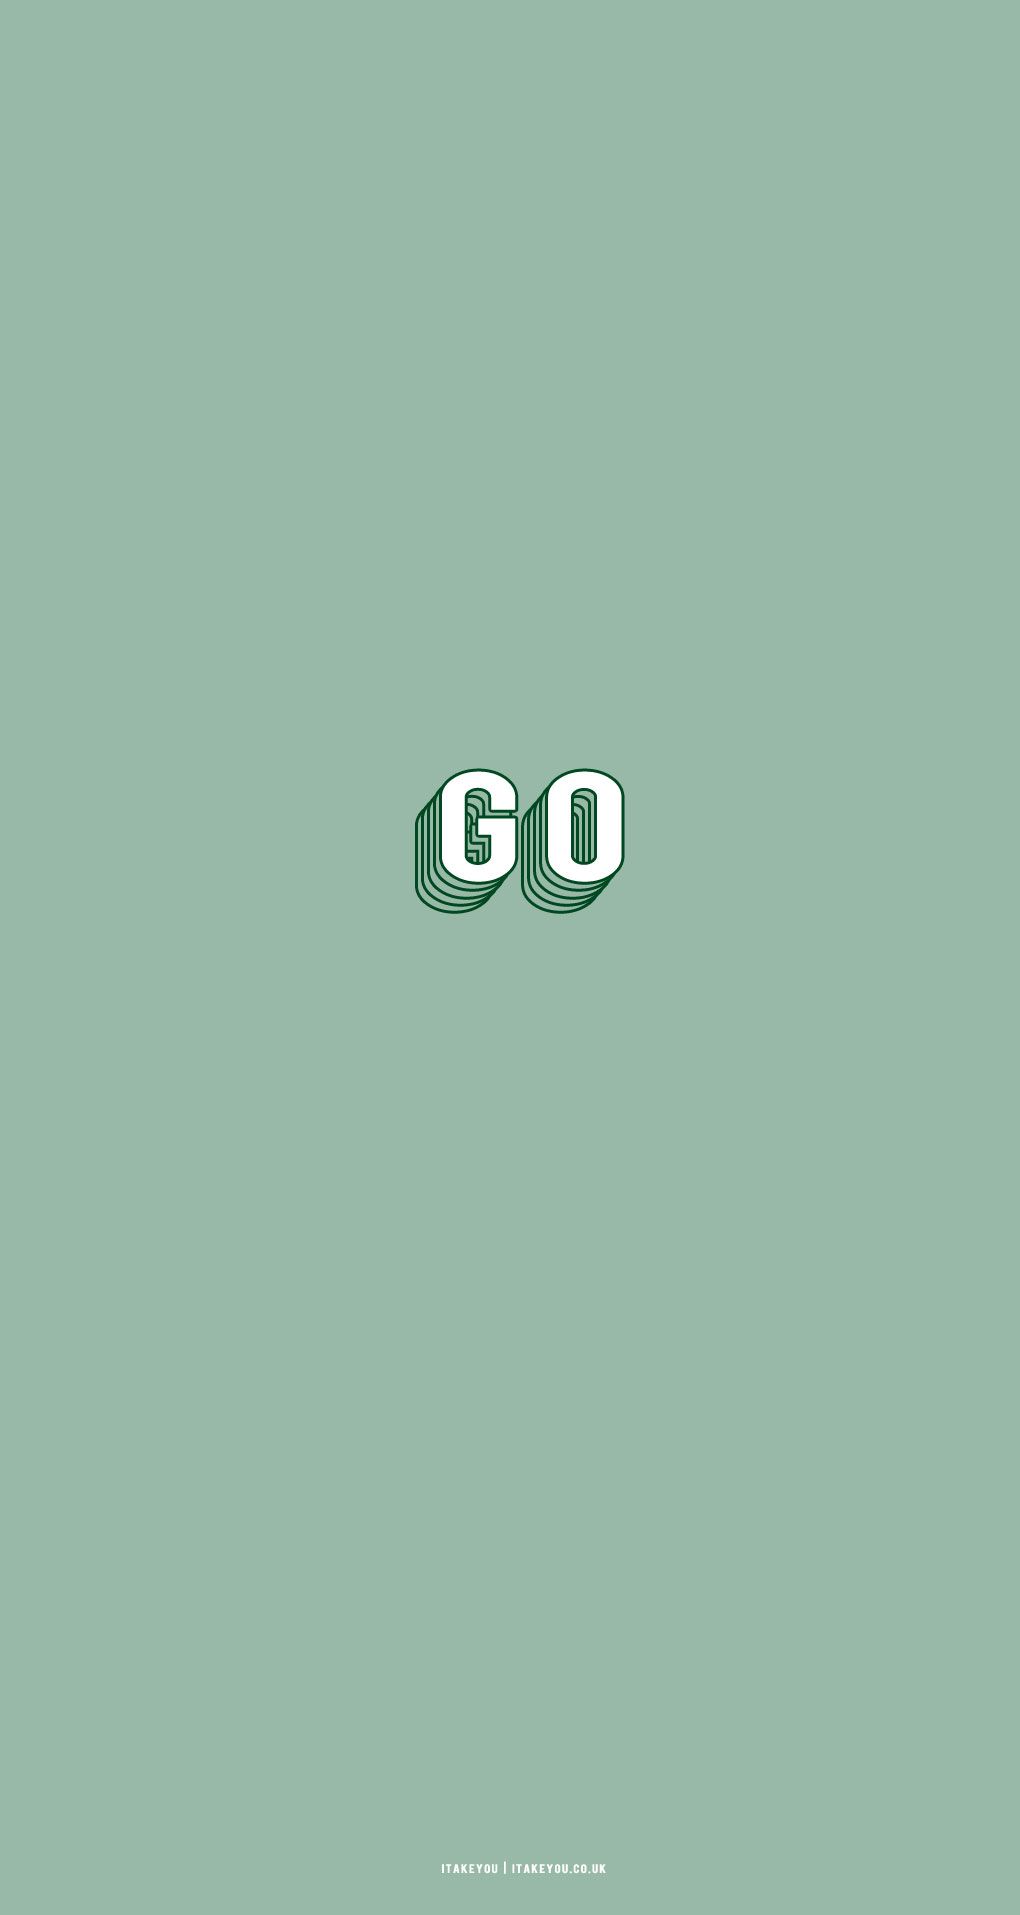 The image of a green background with white text that says go - Green, sage green, minimalist